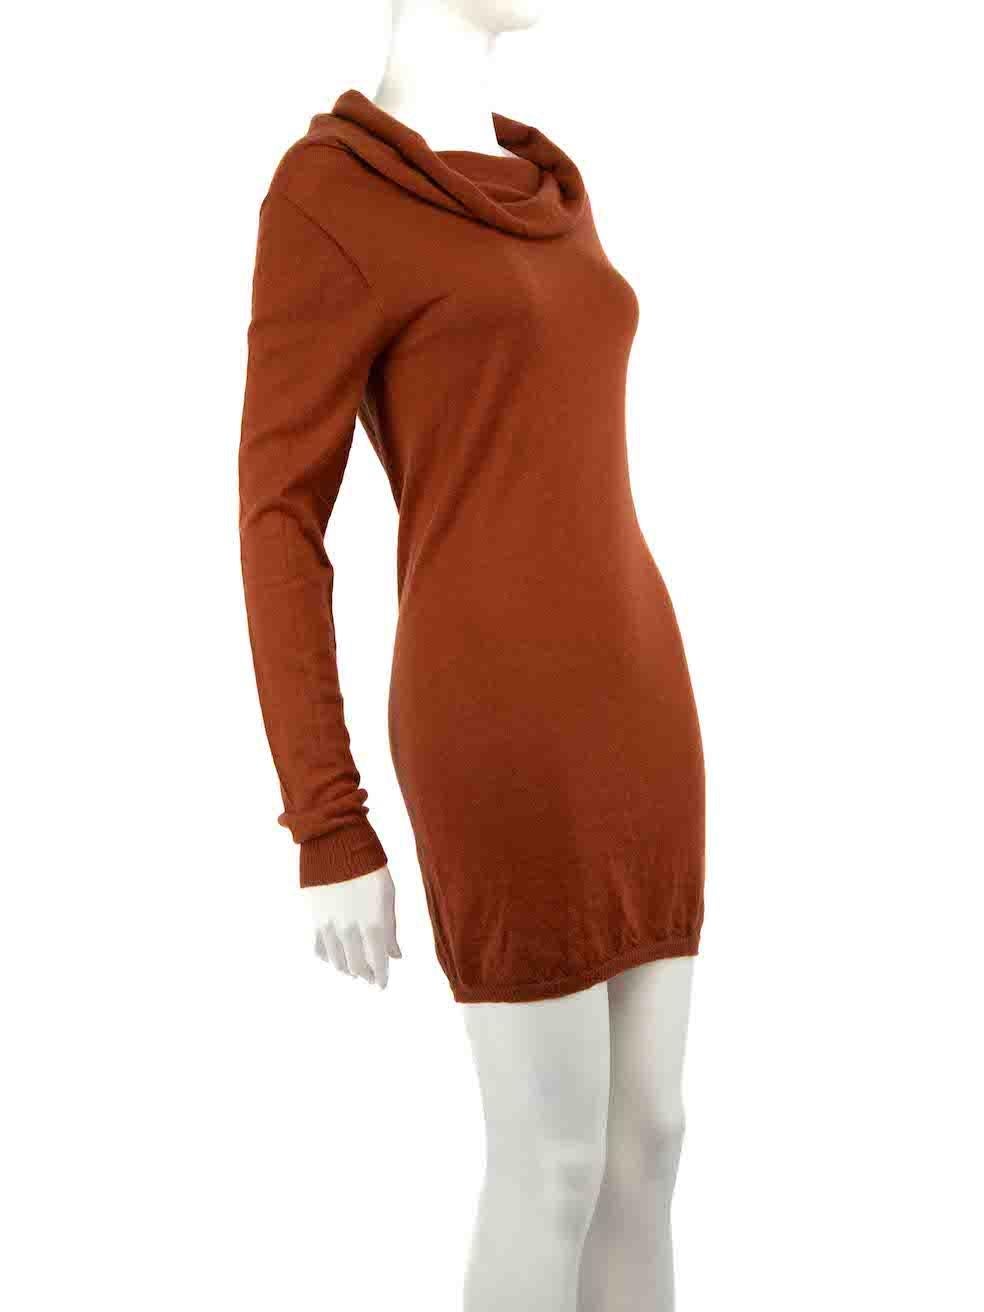 CONDITION is Very good. Minimal visible wear to dress is evident. Composition label has come detached on one side on this used Rick Owens designer resale item.
 
 Details
 Brown
 Cashmere
 Knit sweater dress
 Draped cowl neck
 Long sleeves
 Mini
 
